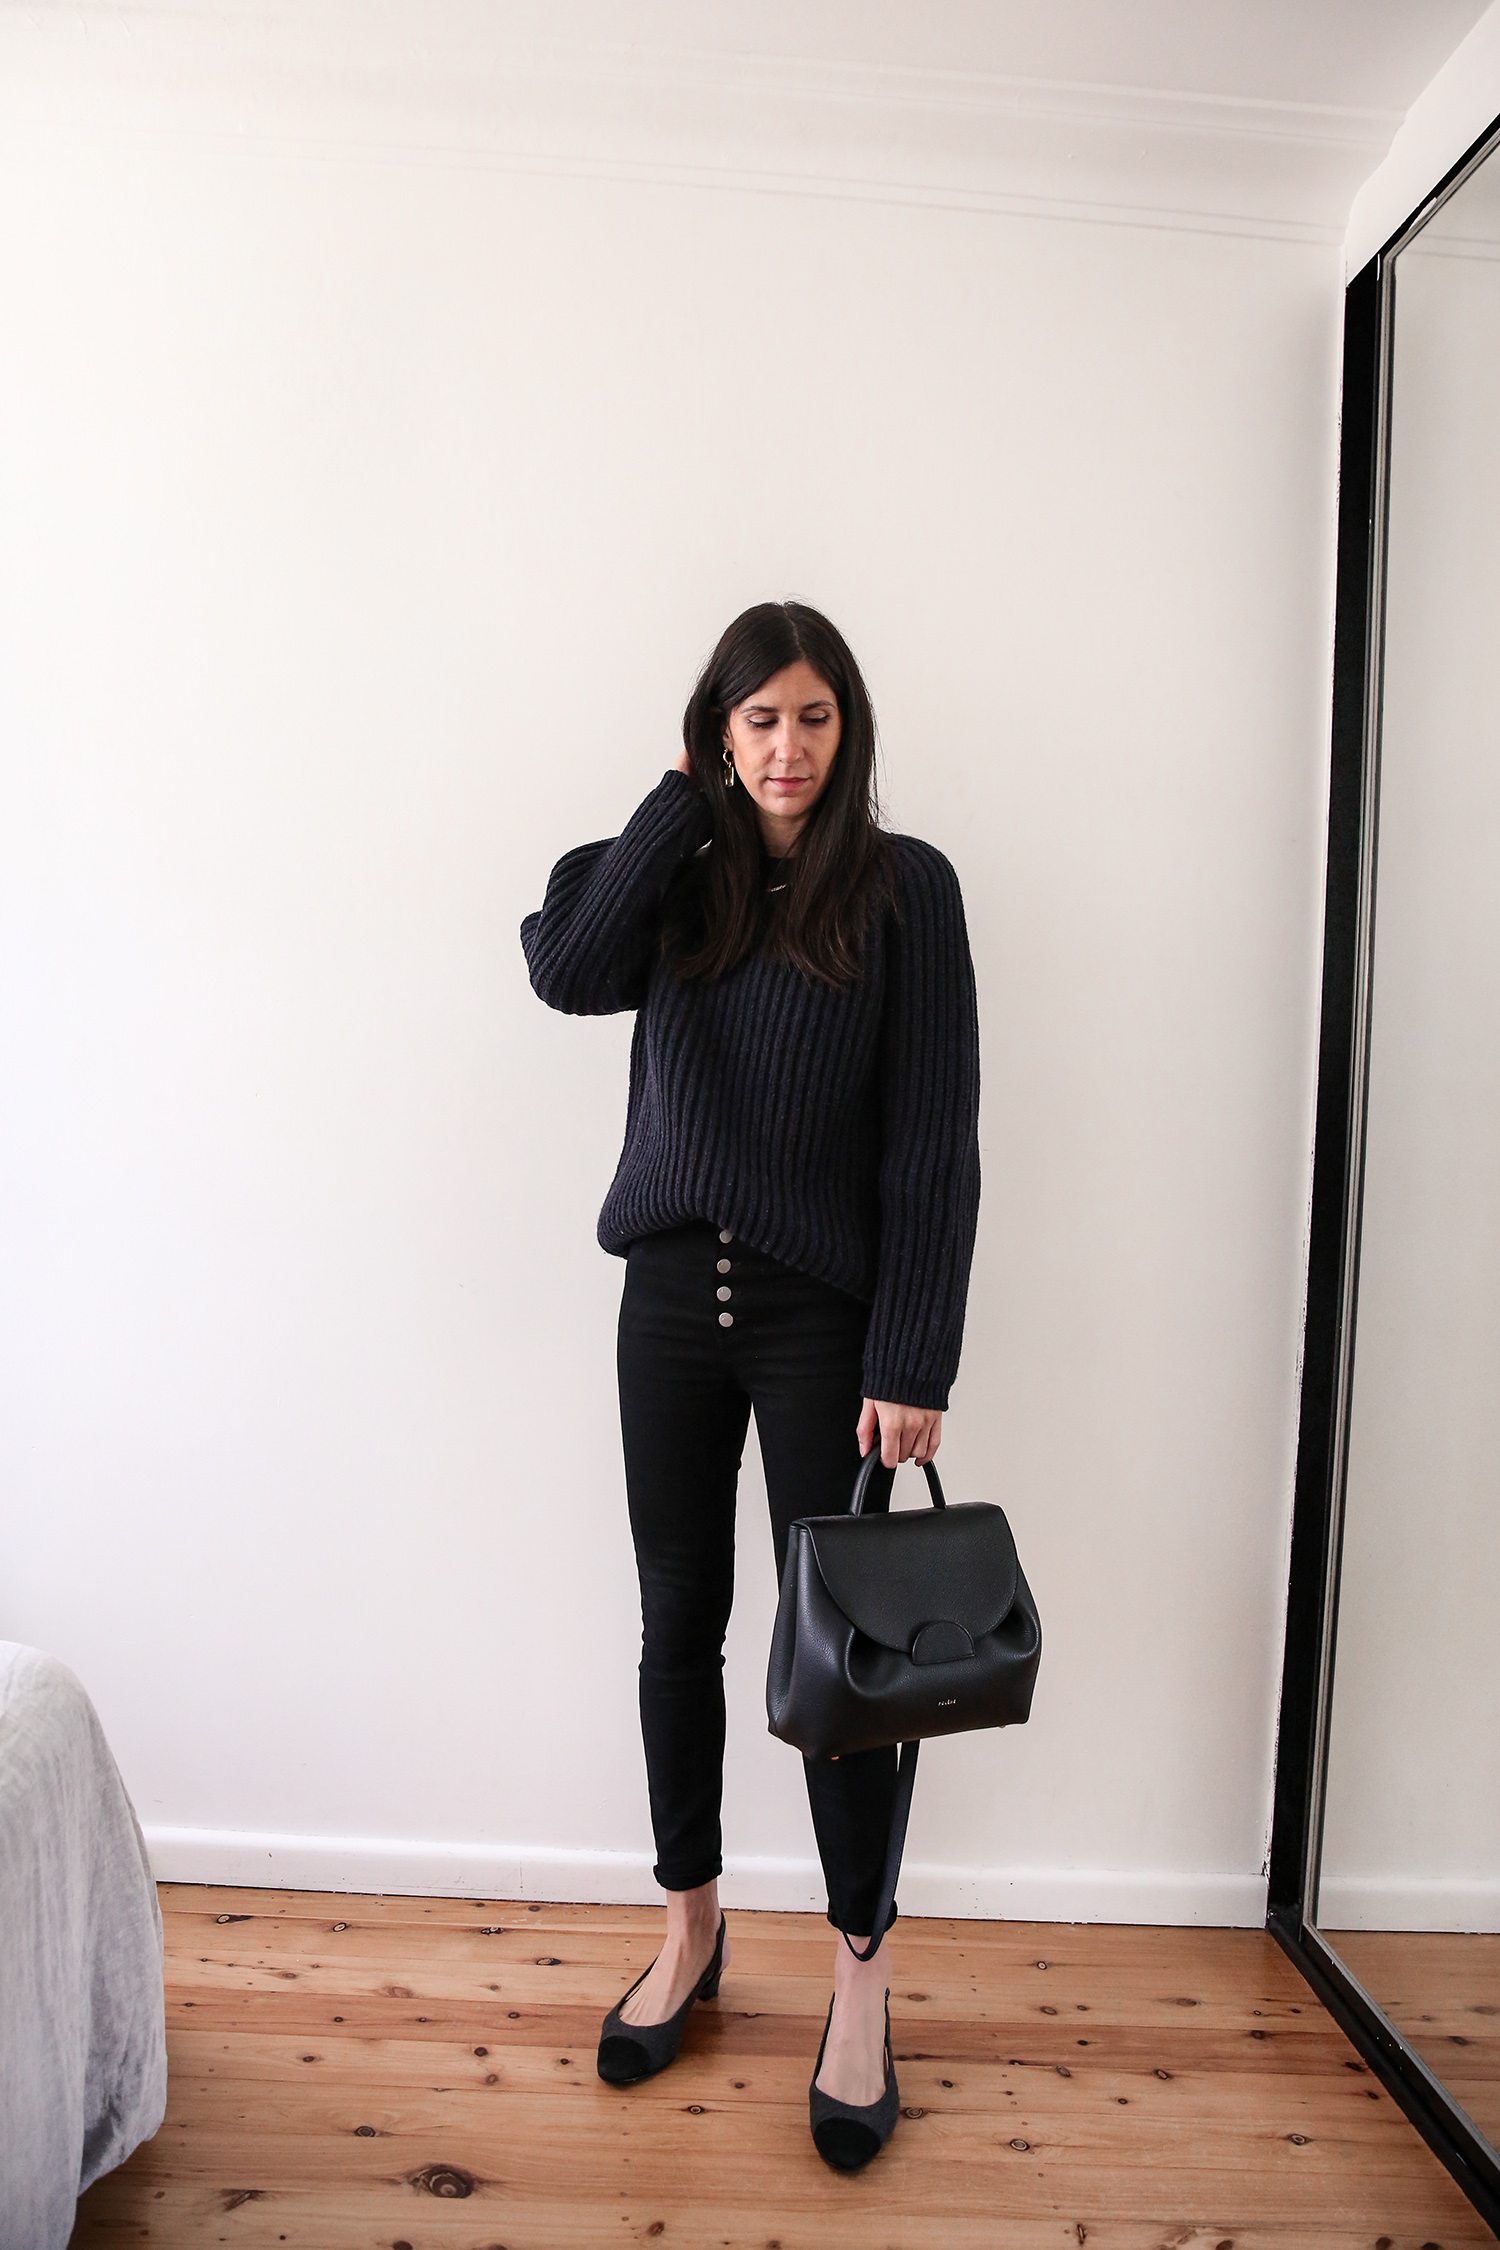 Winter Outfit #1: Oversized knit sweater with skinny jeans - Mademoiselle